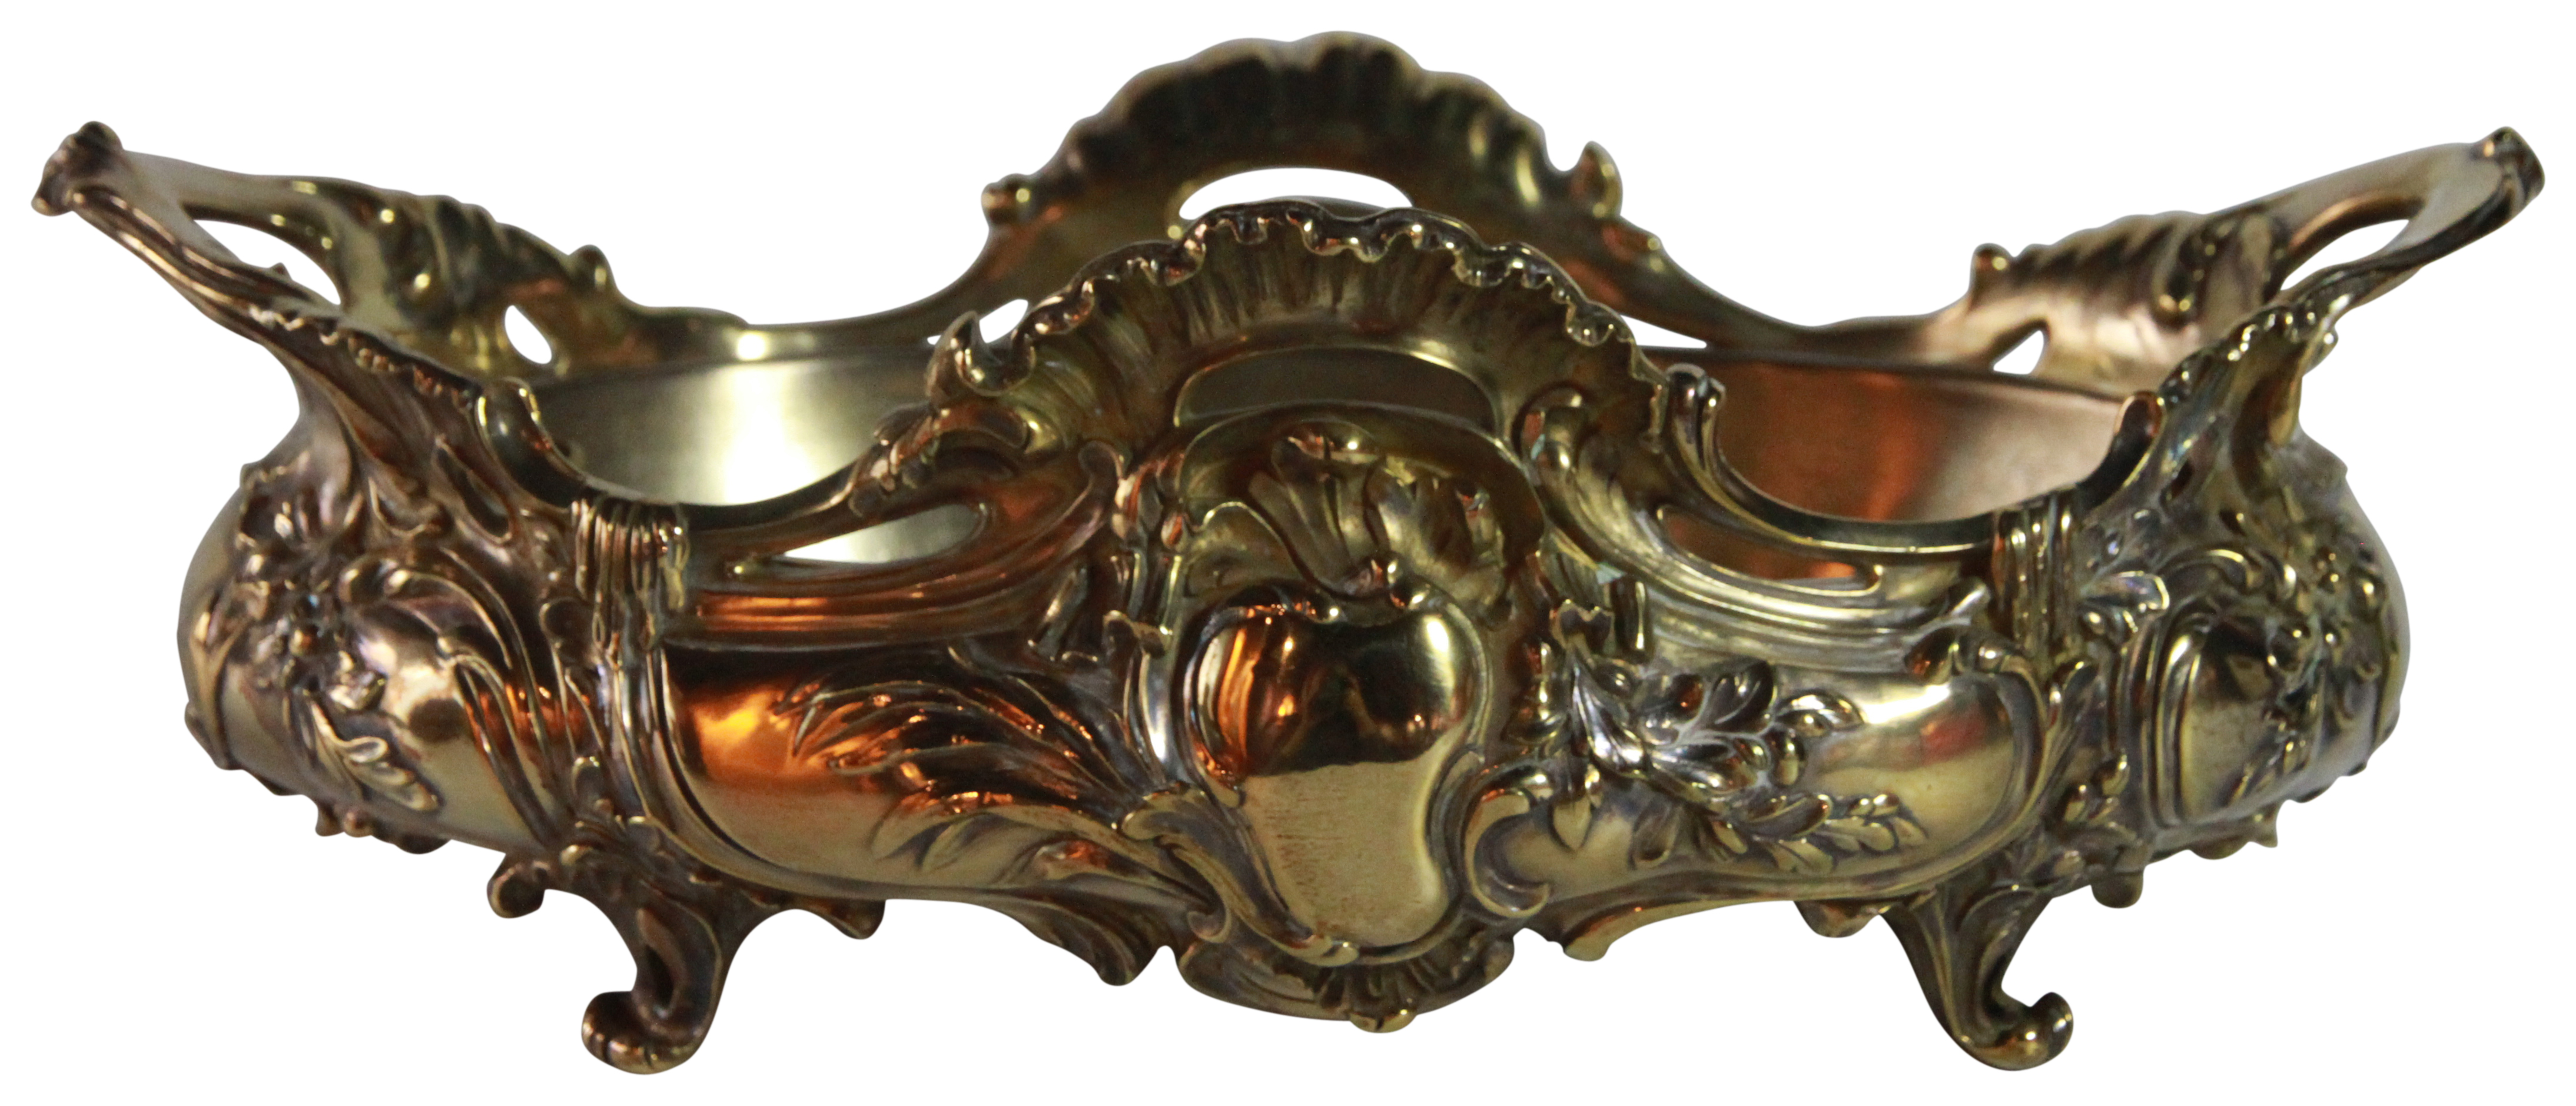 A two handled oval gilt bronze jardineer, possibly French. (L: 37cm), PROVENANCE: Property of a